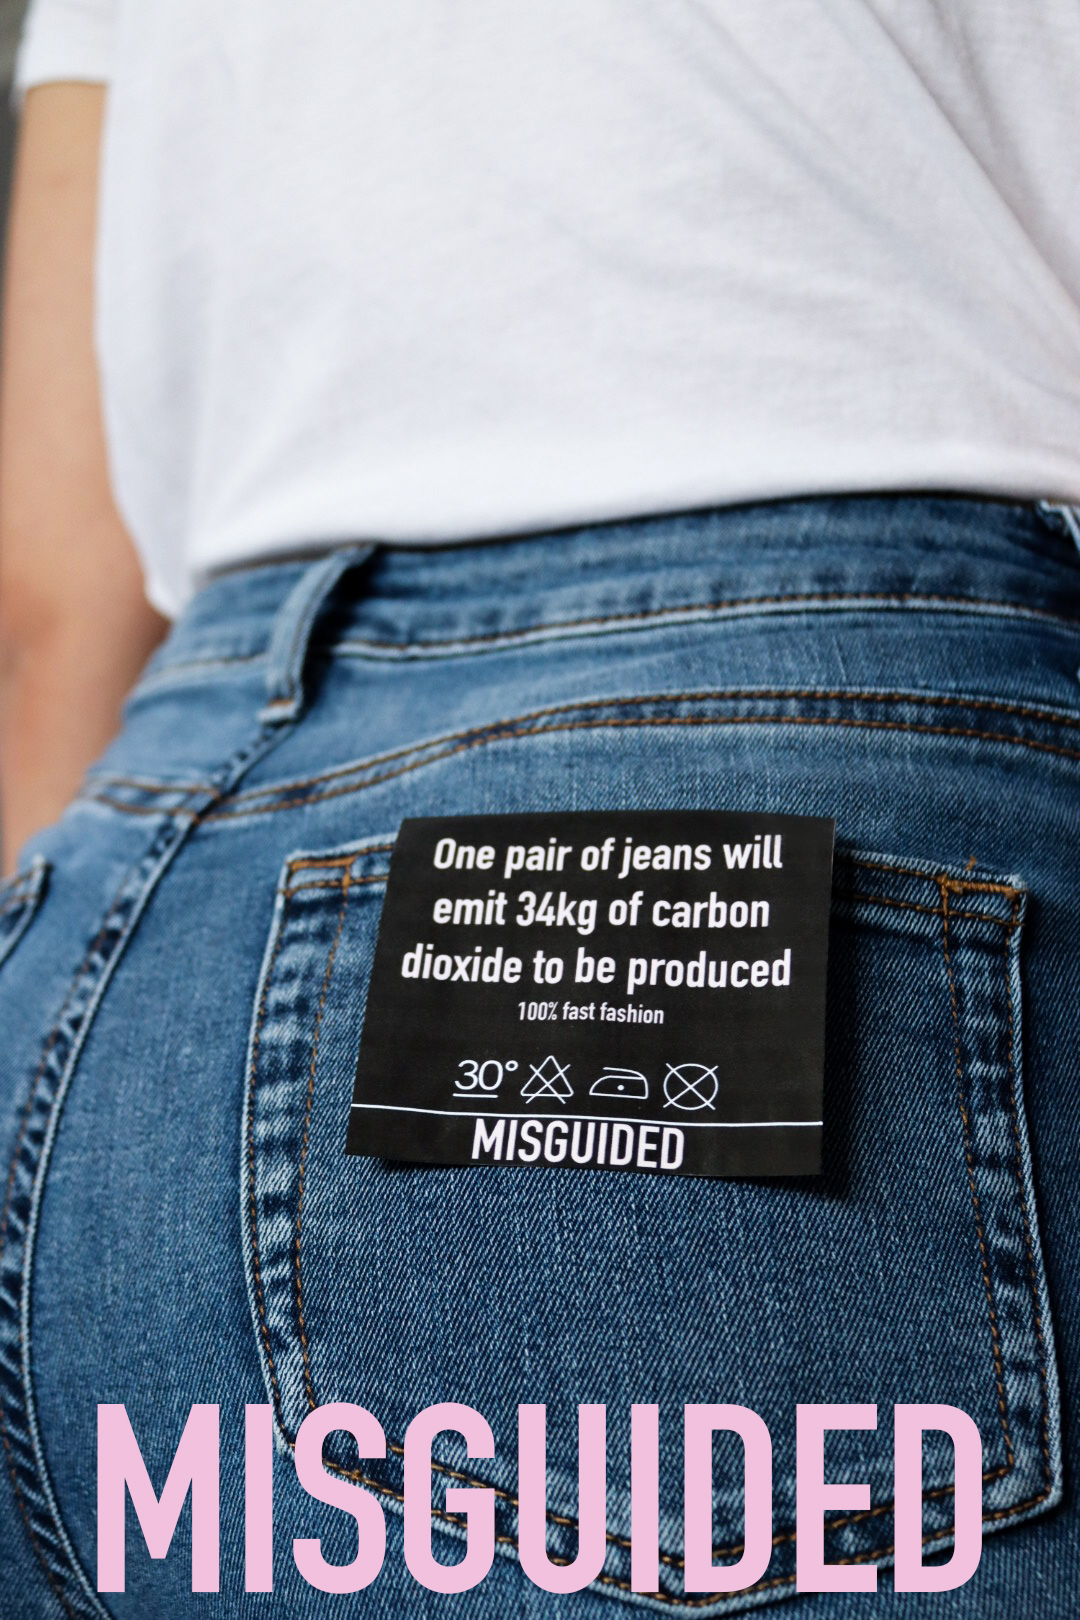 ‘MISGUIDED’ is a fake fast fashion brand, used to create a series of promotional posters about the fast fashion industry and the environmental impacts it has on the world.